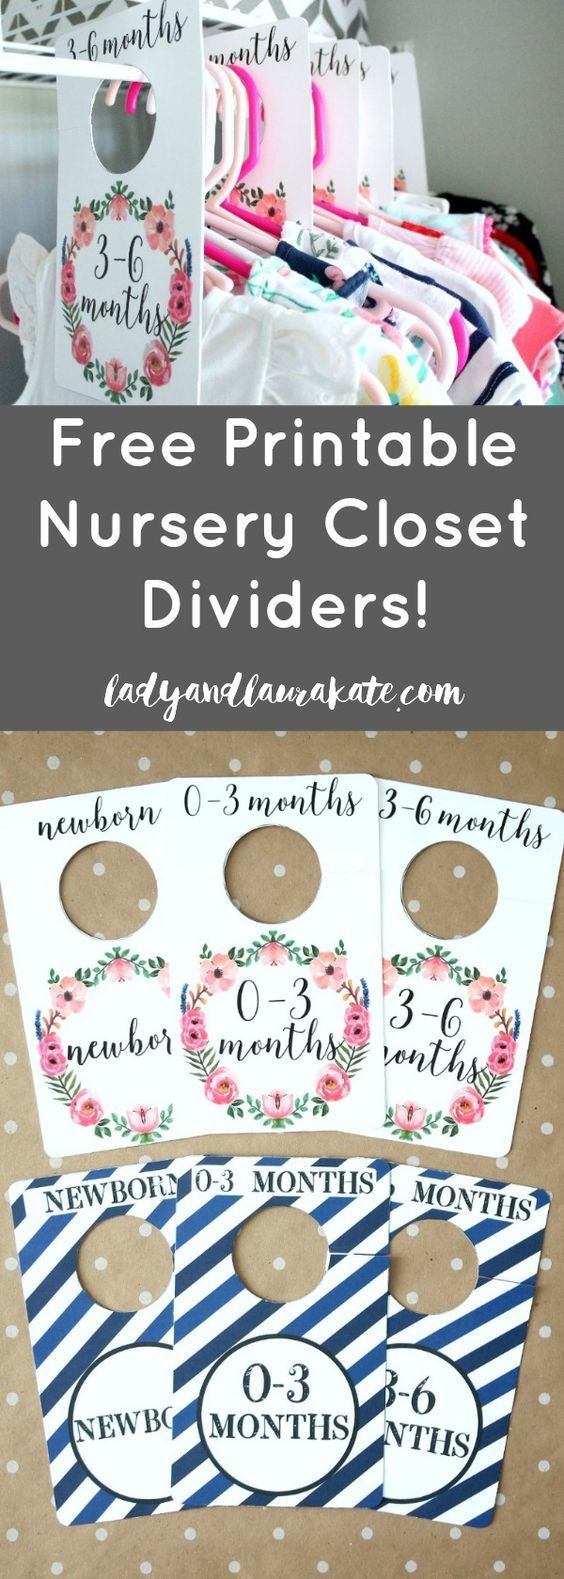 Make these DIY nursery closet dividers from a free printable! Available for both boys and girls sizes Newborn to 24 months!